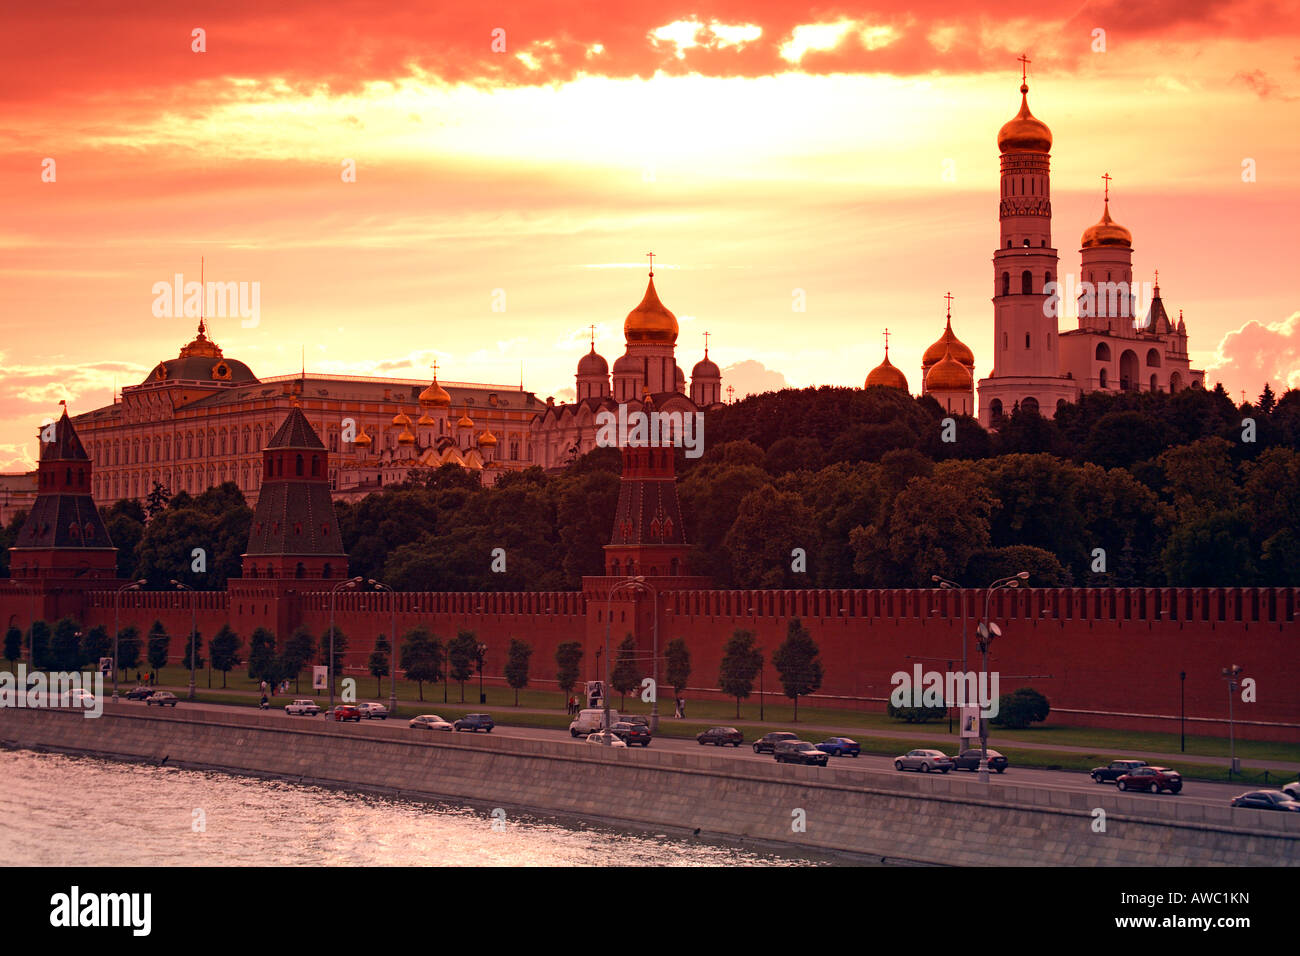 Russia, Moscow, The Kremlin, Ivan The Great Bell Tower, Moscow River, Sunset Stock Photo